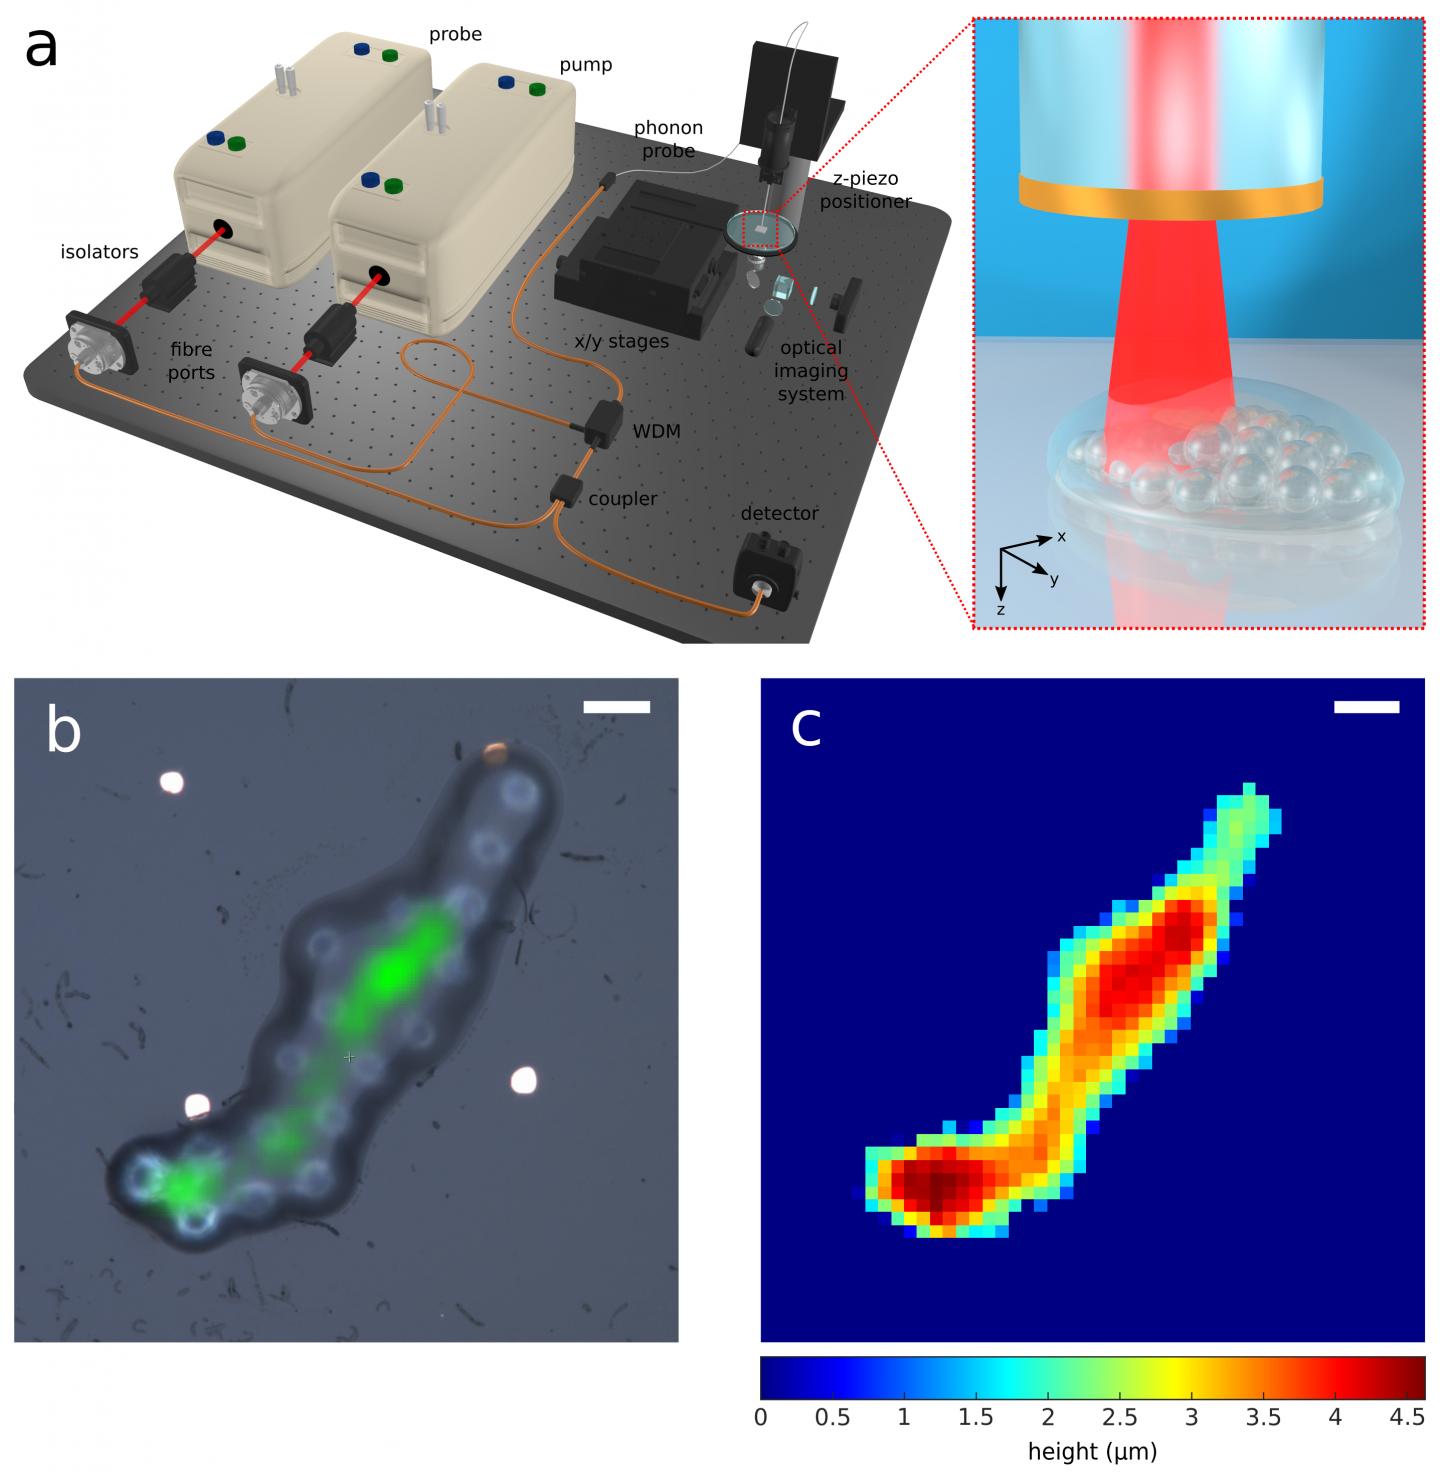 Figure | Phonon probe system design and multi-channel 3D imaging